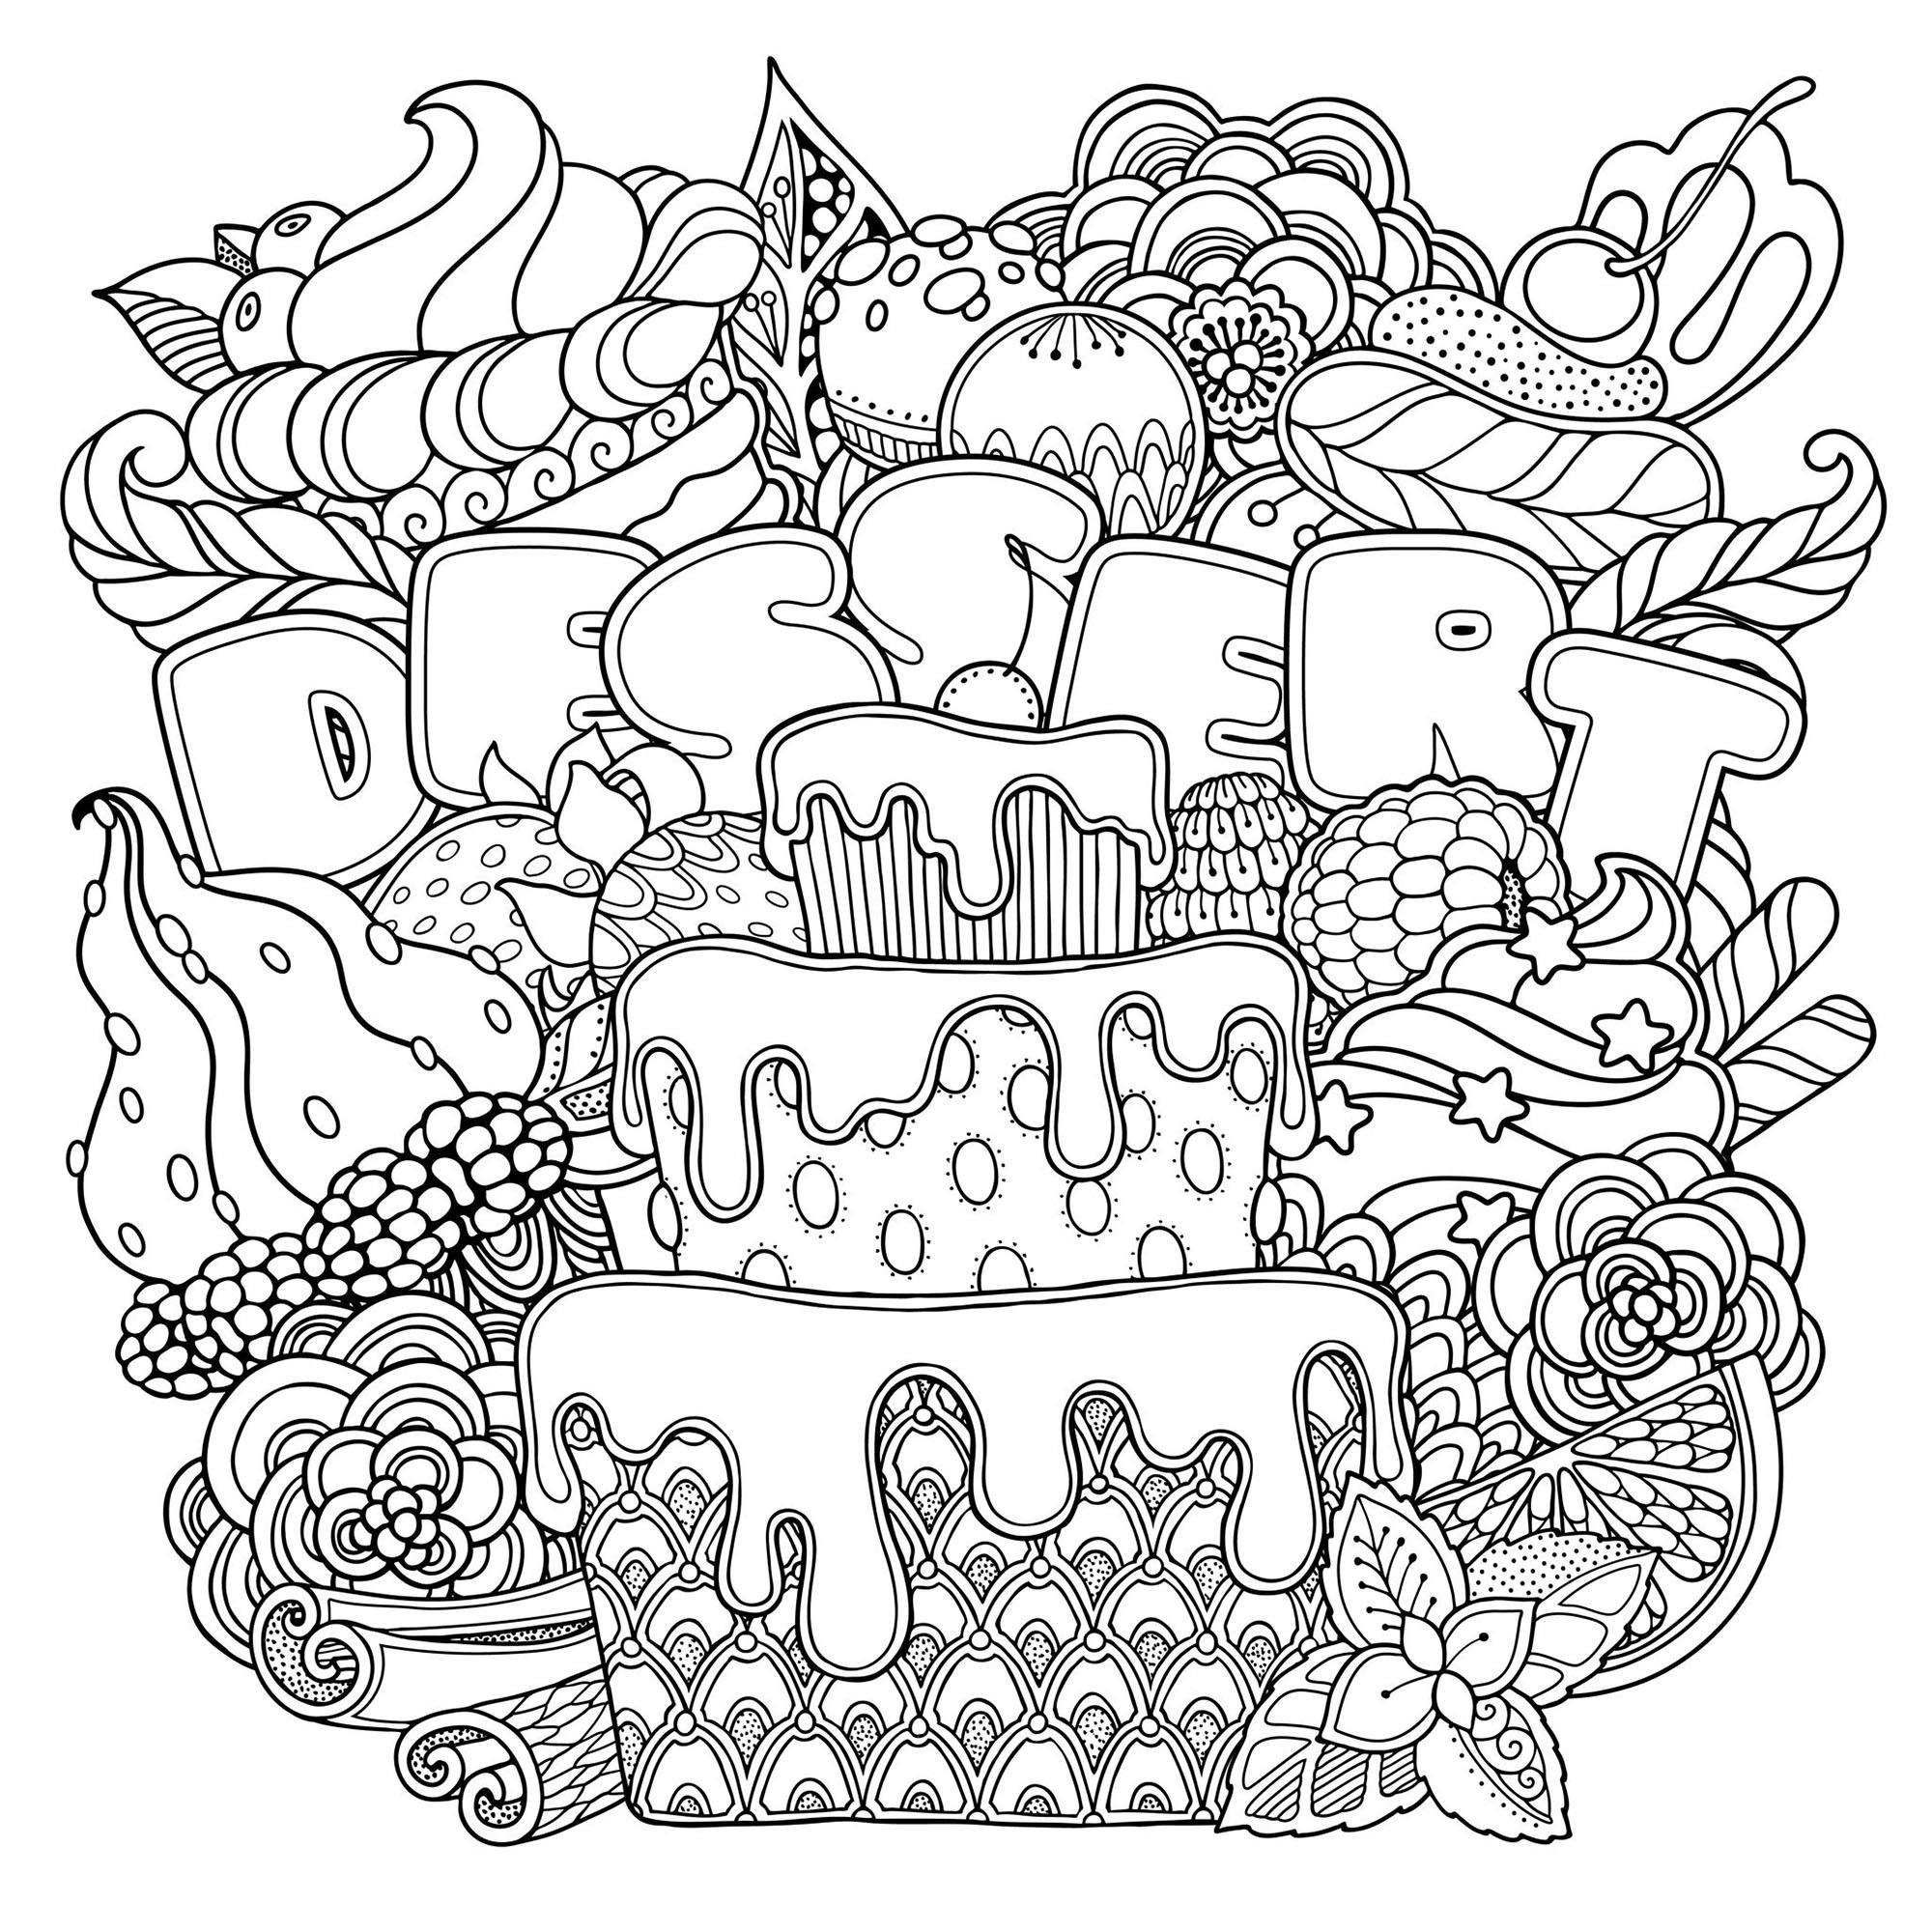 Download Mix of desserts - Cupcakes Adult Coloring Pages